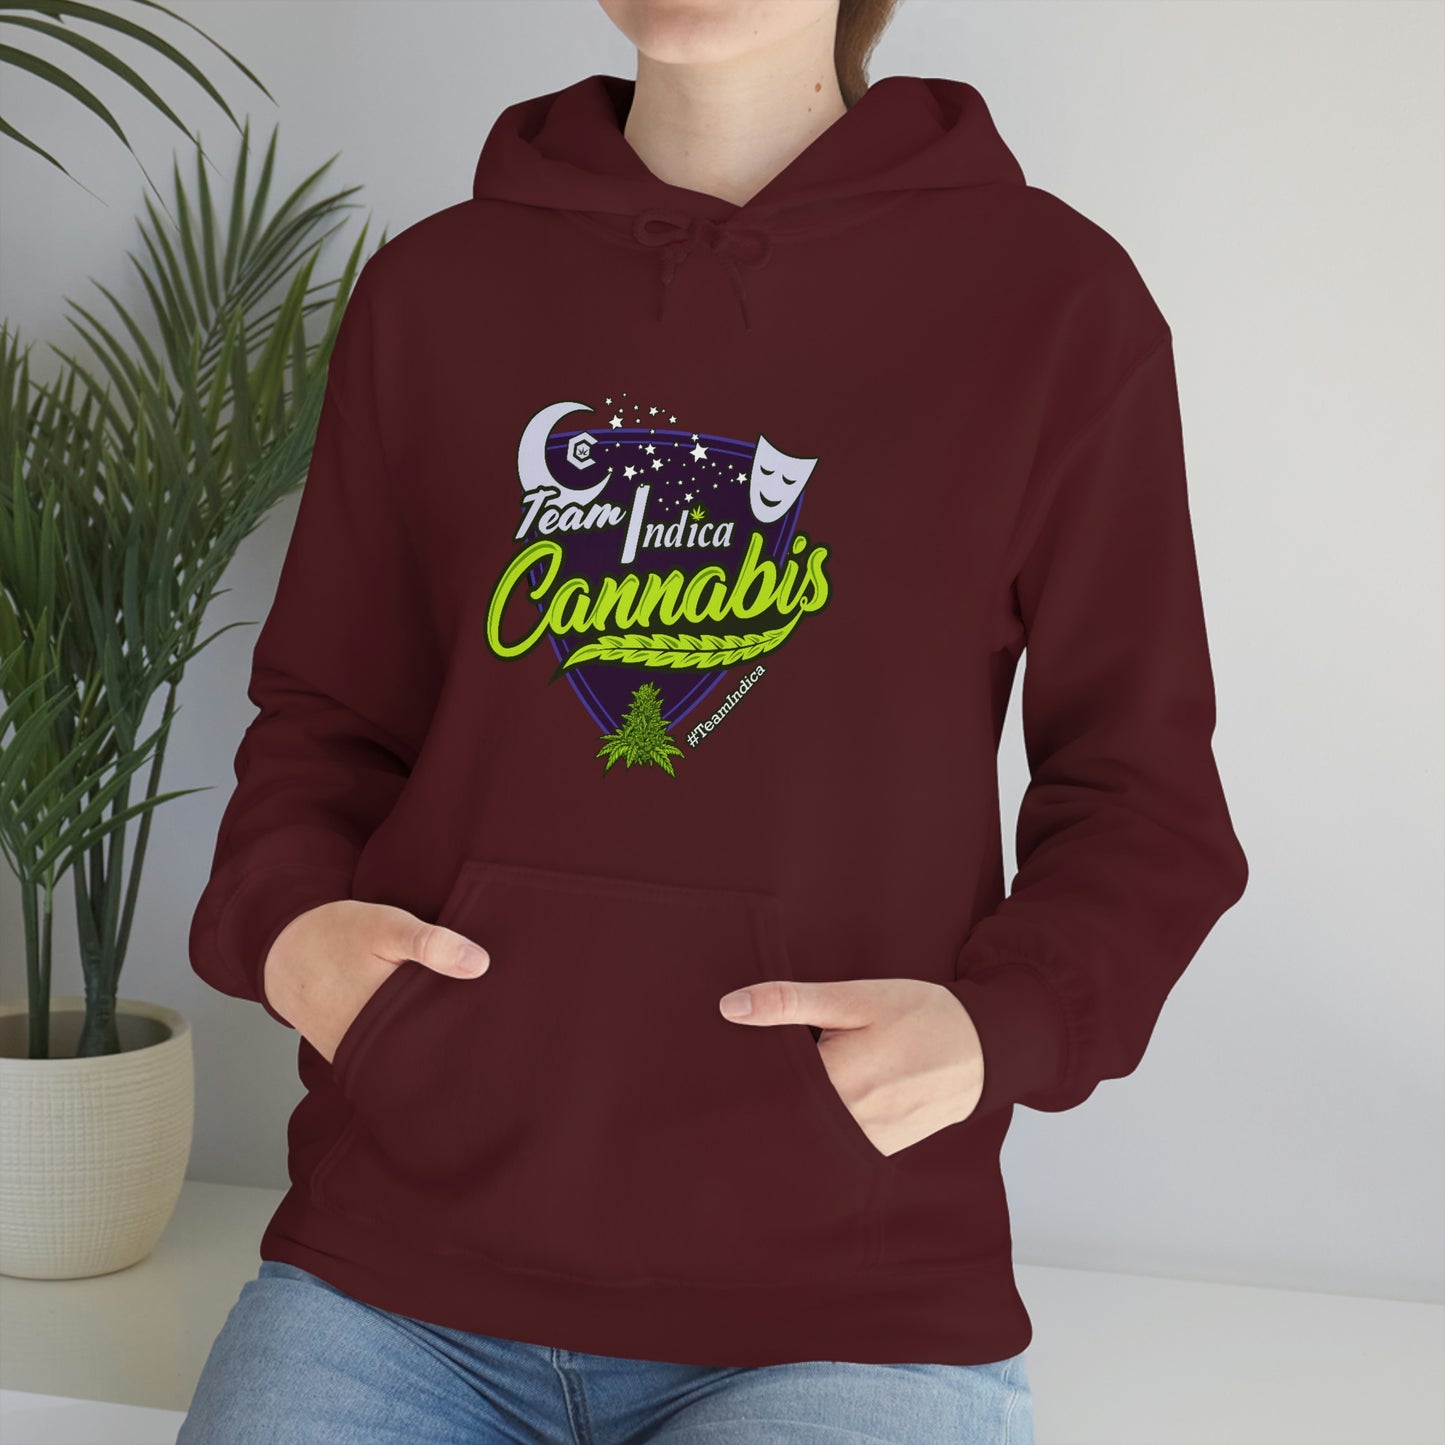 a woman wearing a maroon hoodie with the Team Indica Cannabis Pullover on it.